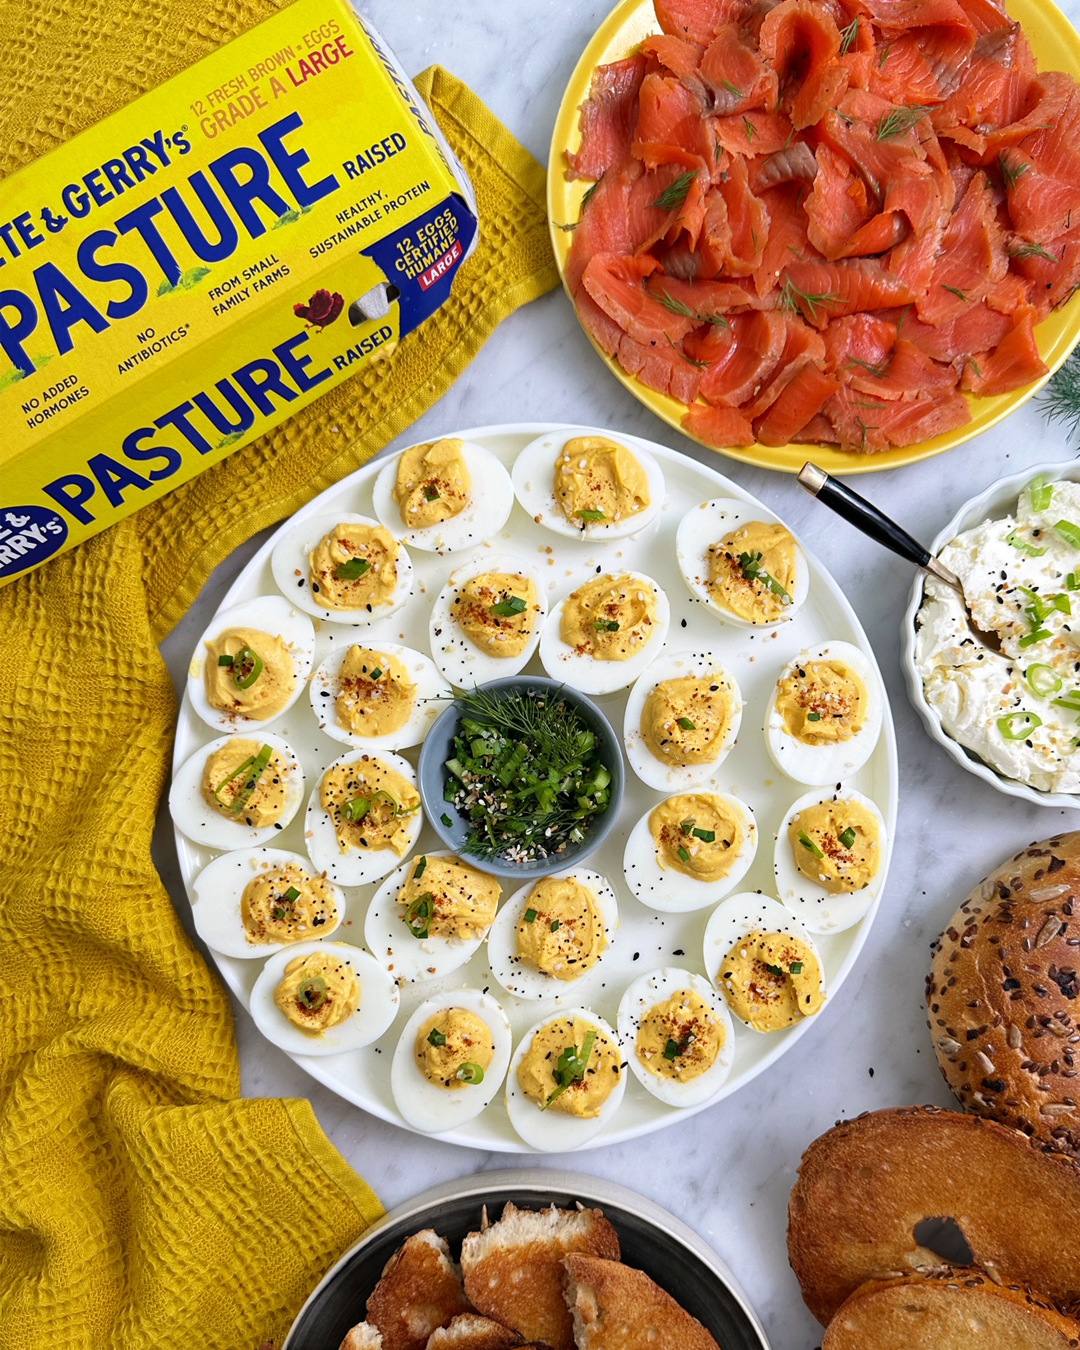 A budget-friendly recipe for deviled eggs served on a tray with everything bagel seasoning and bagel pieces. | peteandgerrys.com